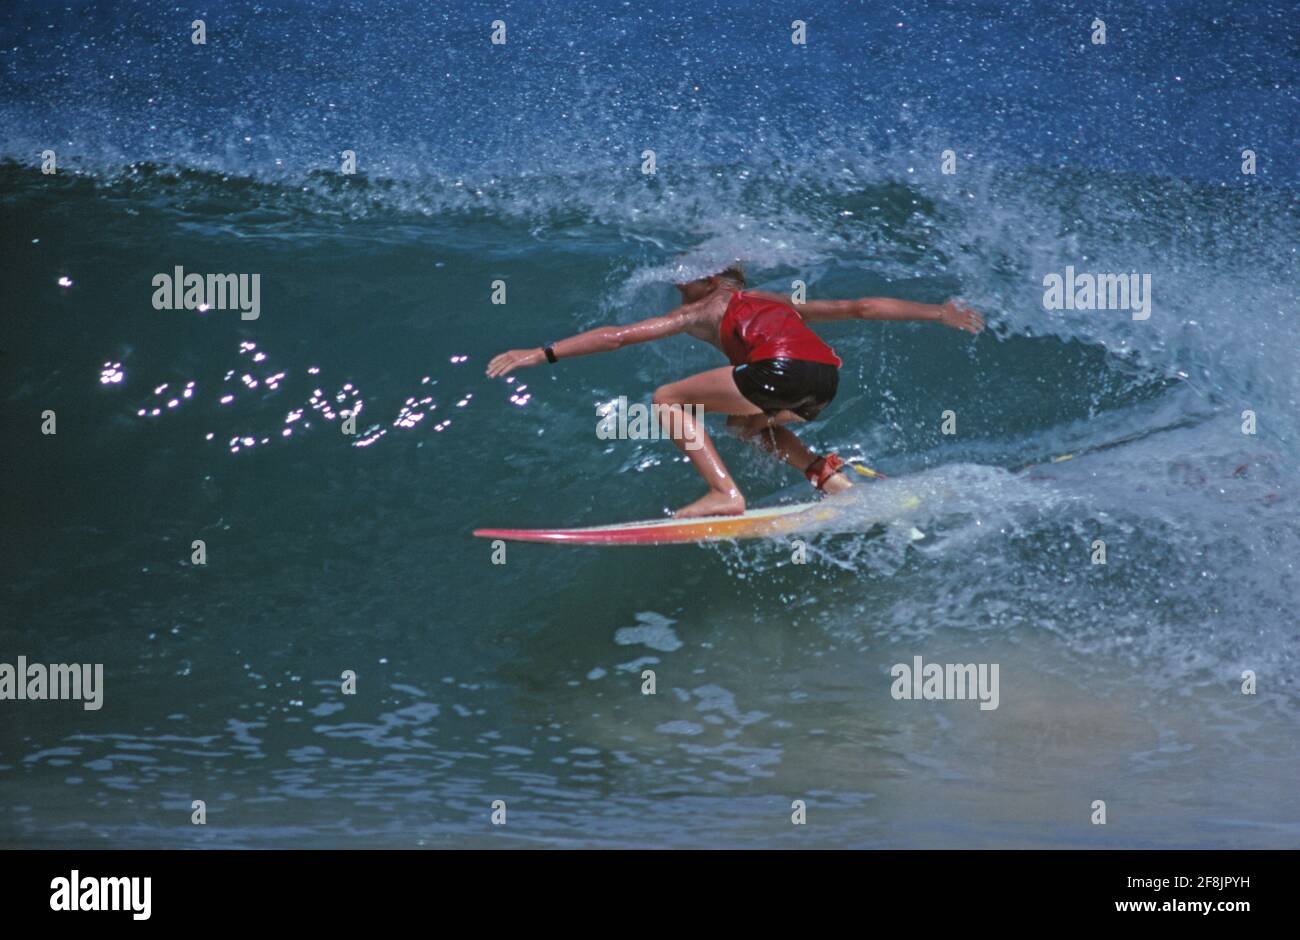 Surfing. Surfer in tube wave. Stock Photo